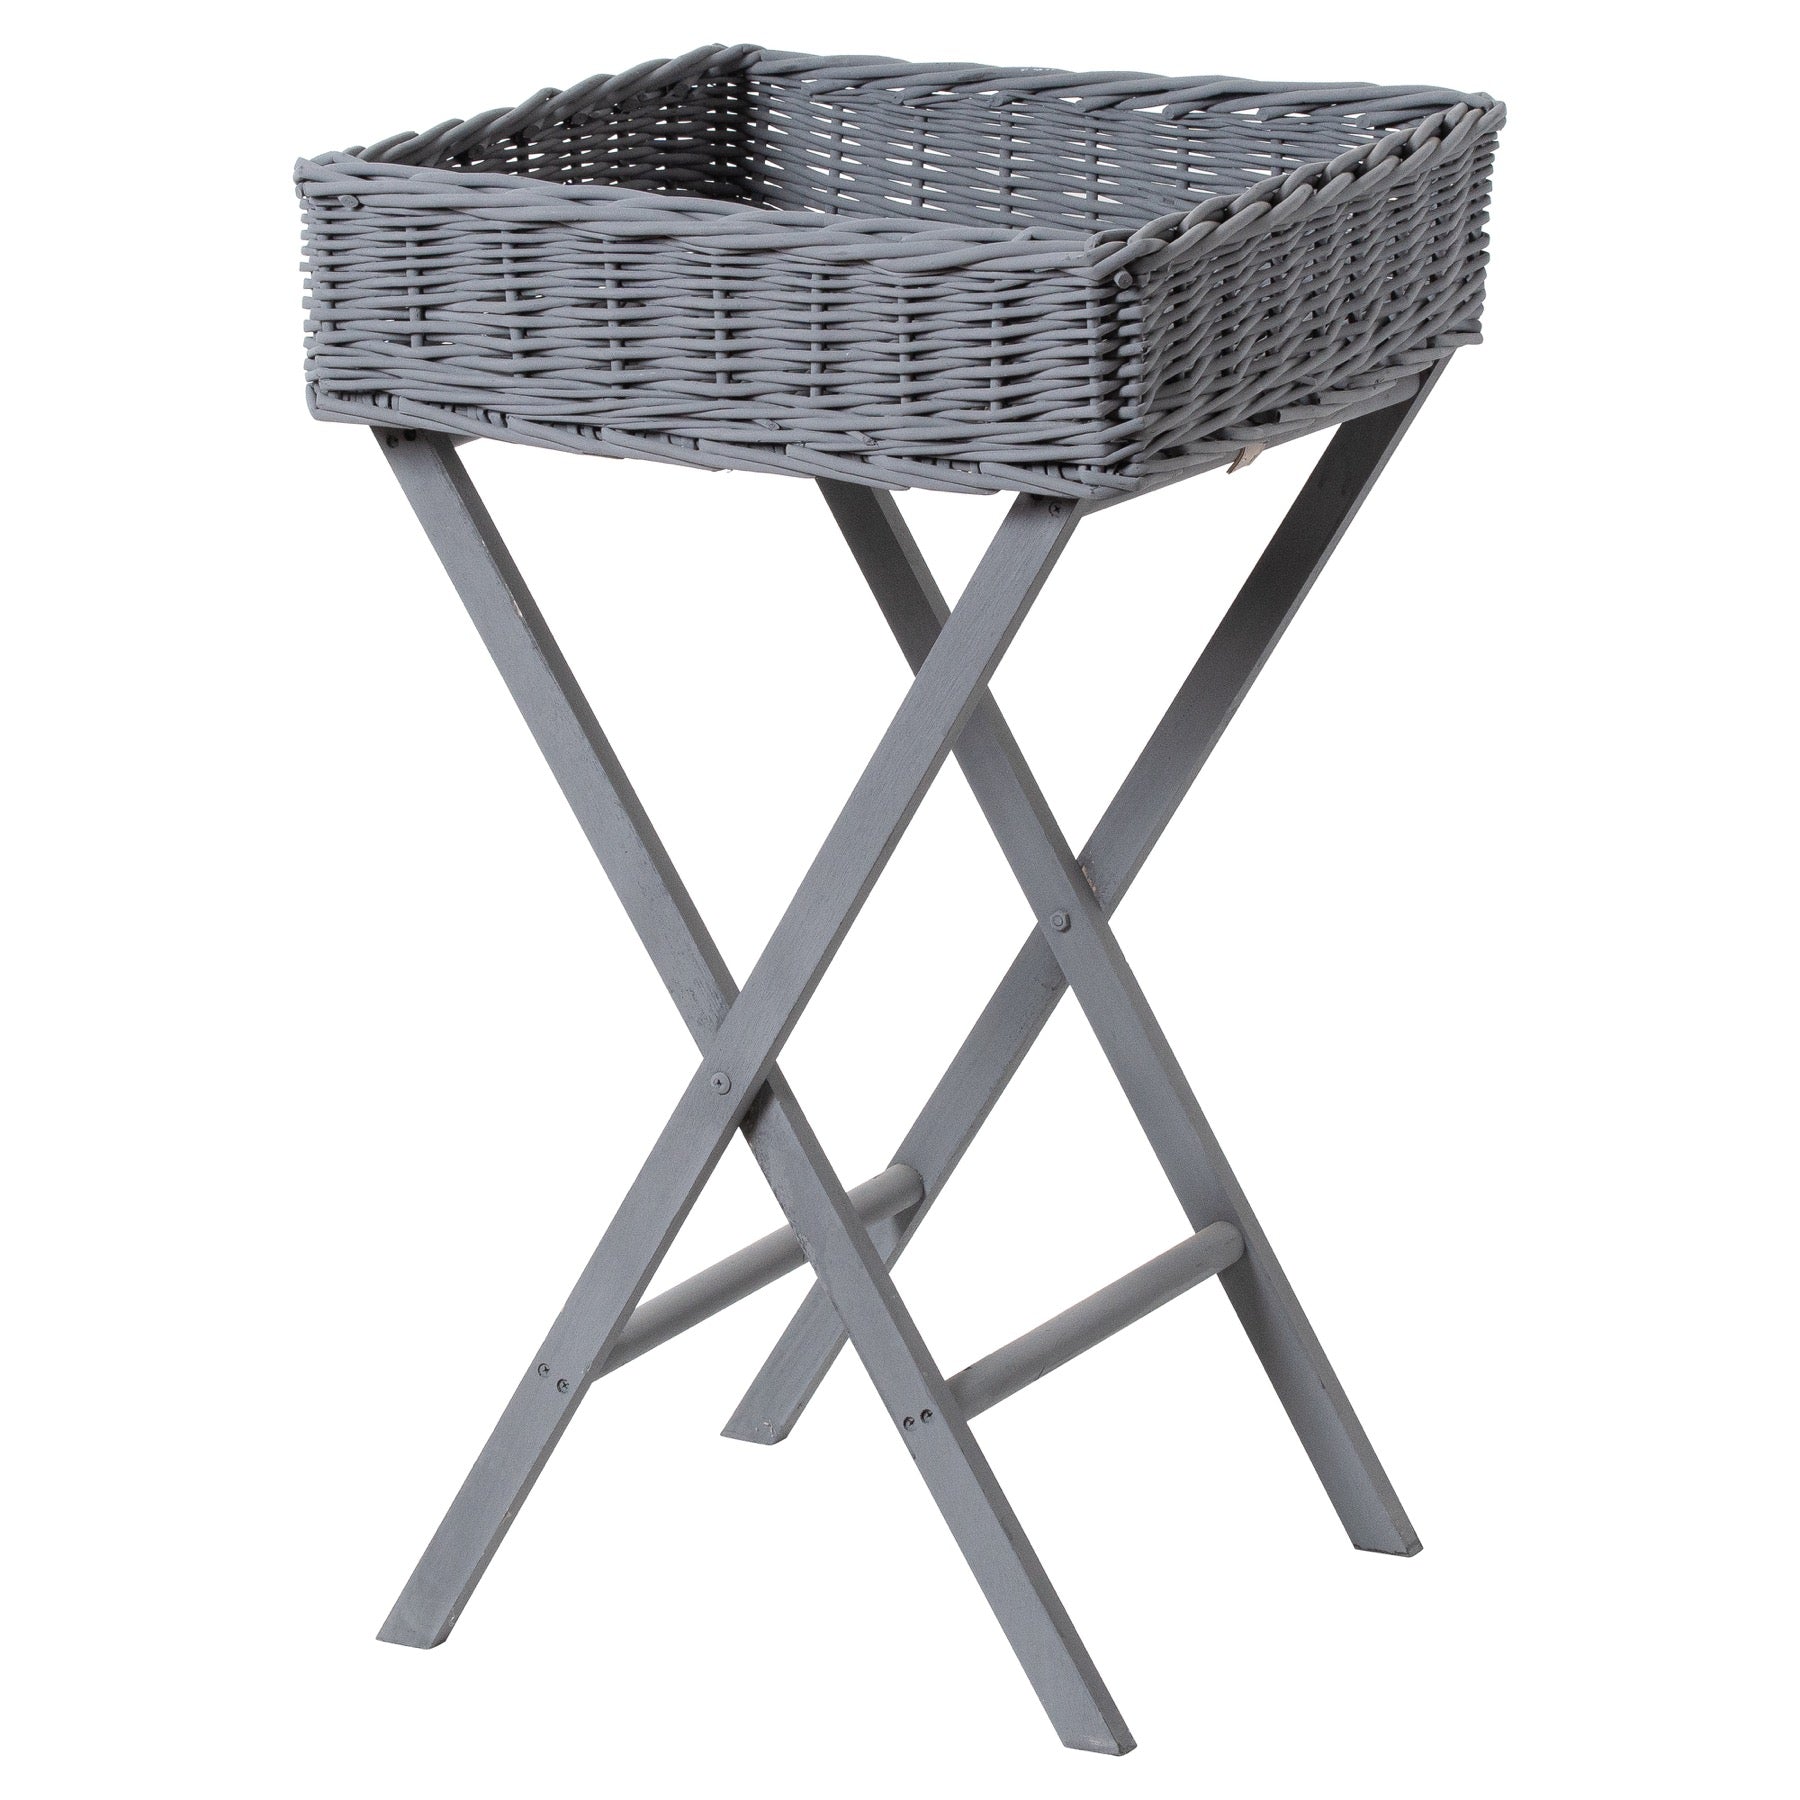 Large Grey Wicker Basket Butler Tray-product